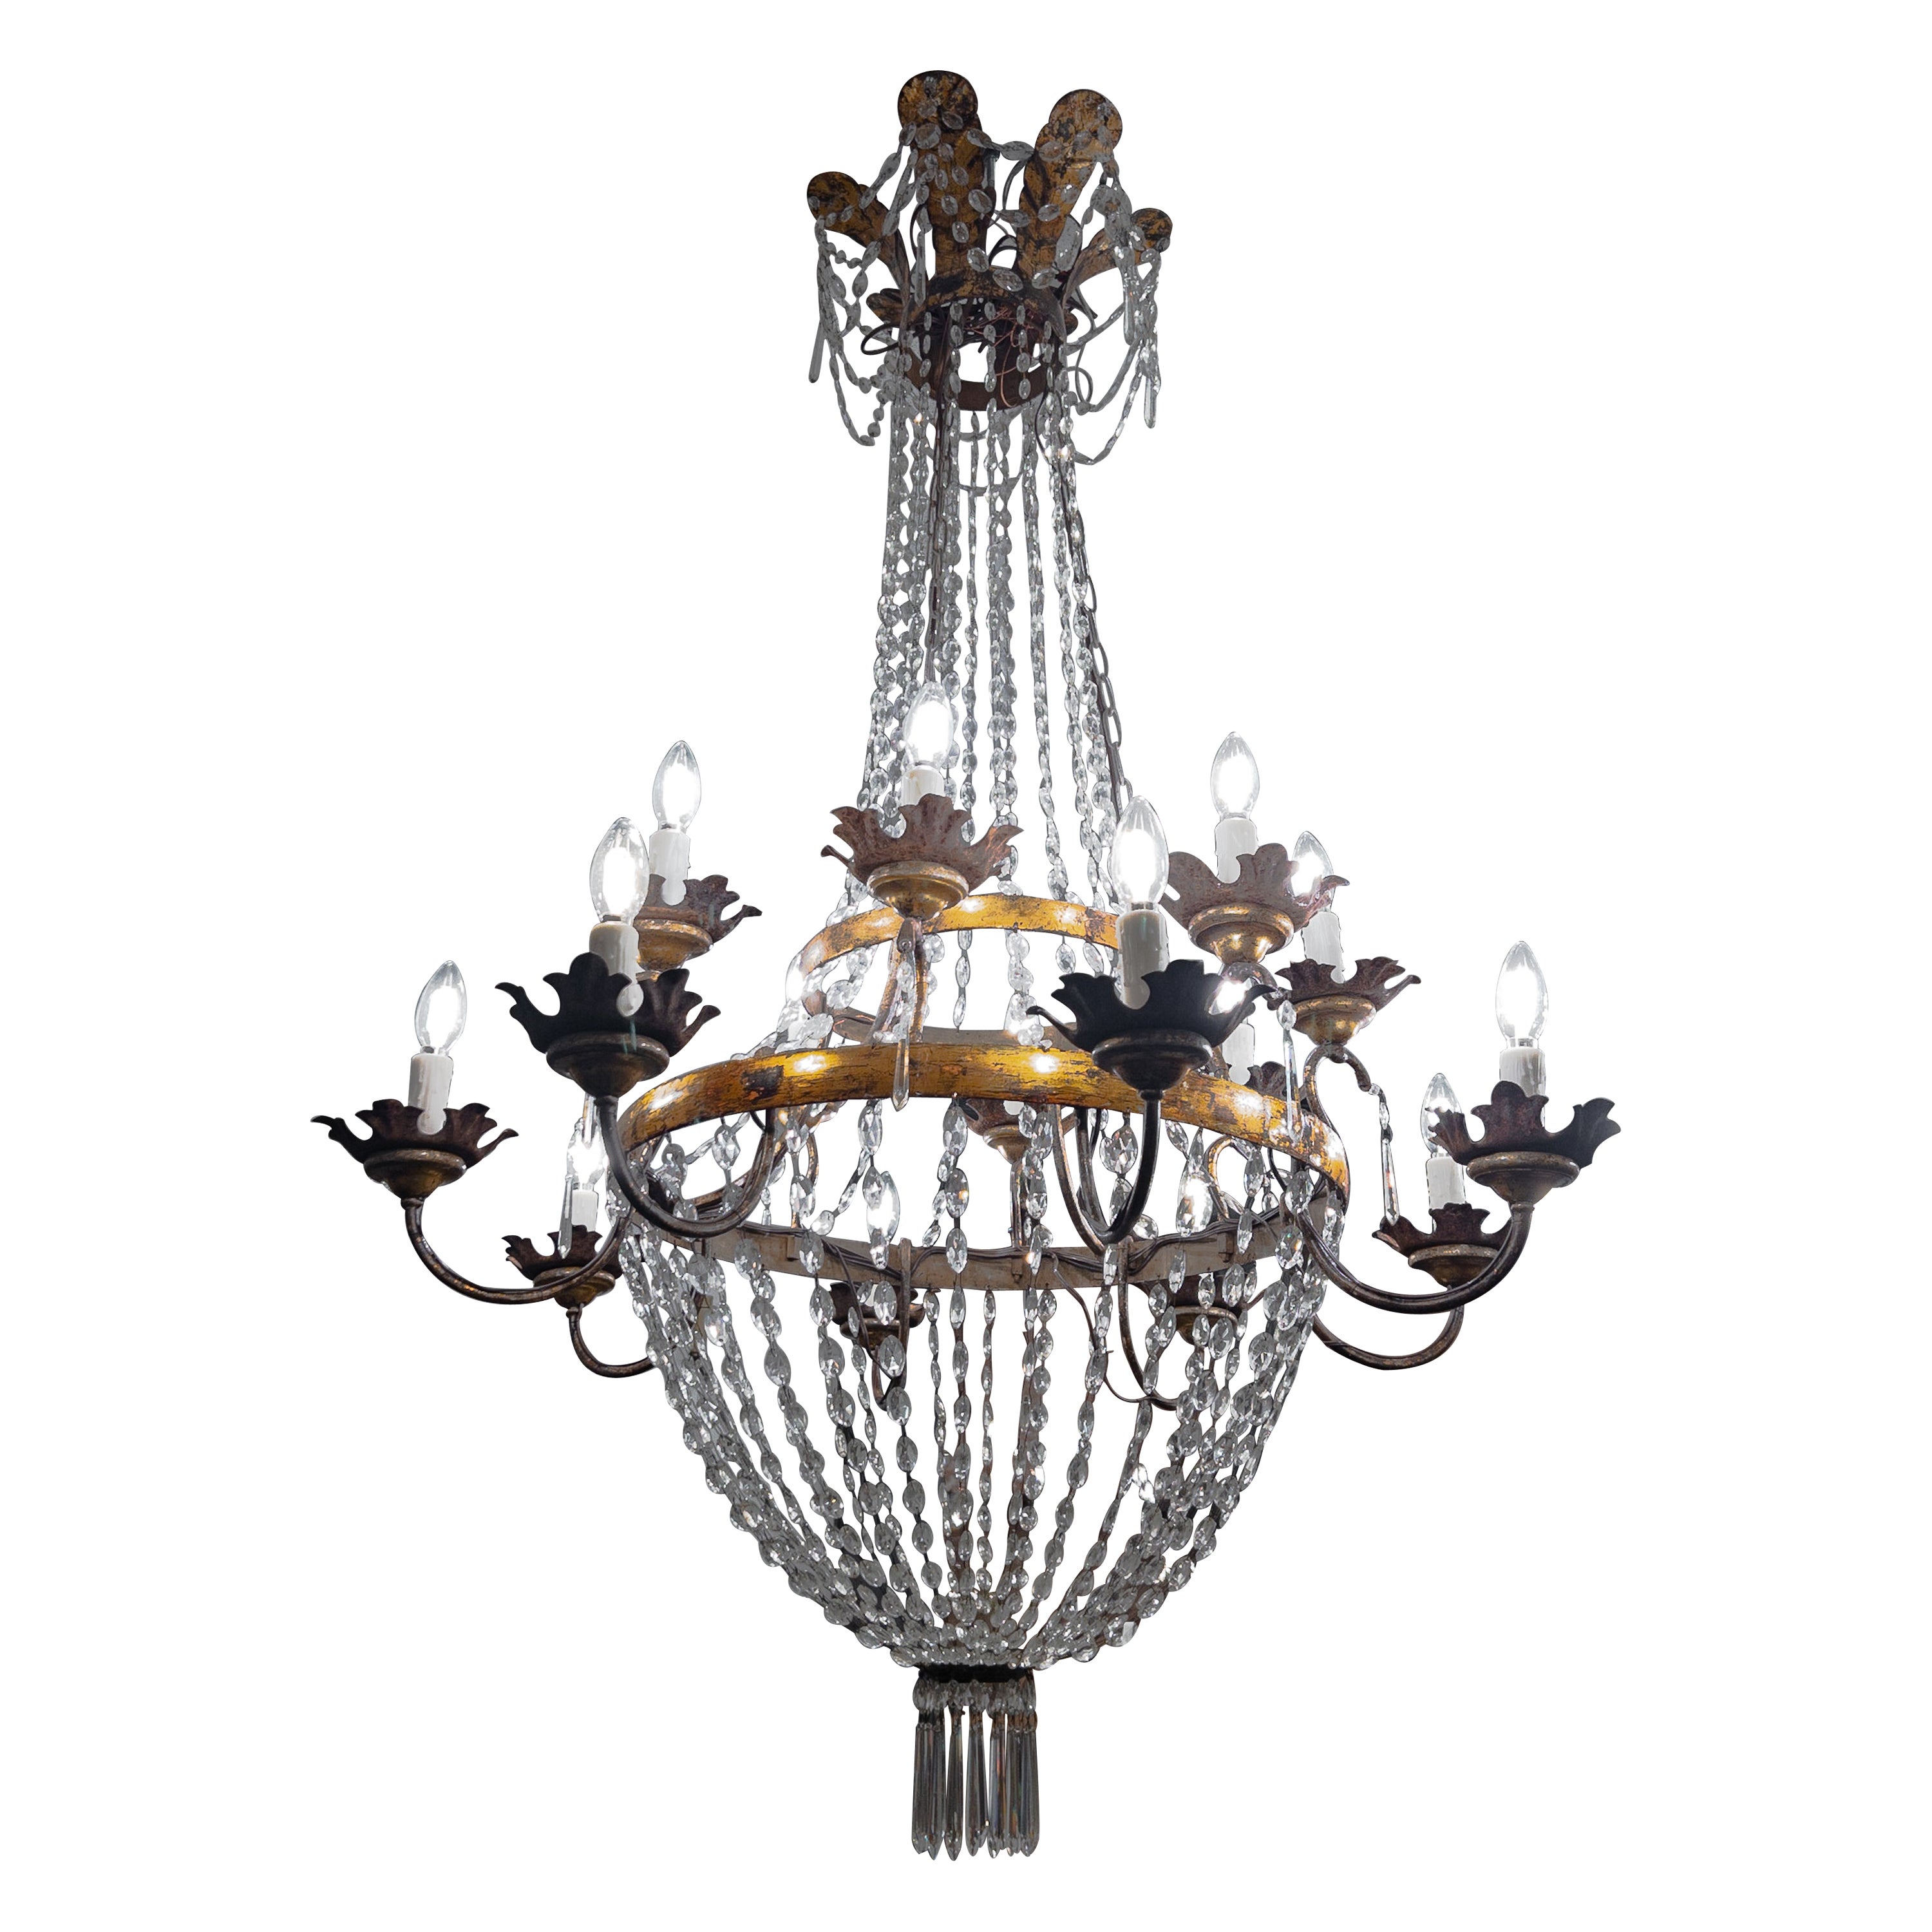 19th Century Directoire Style Crystal Chandelier (2 Available)